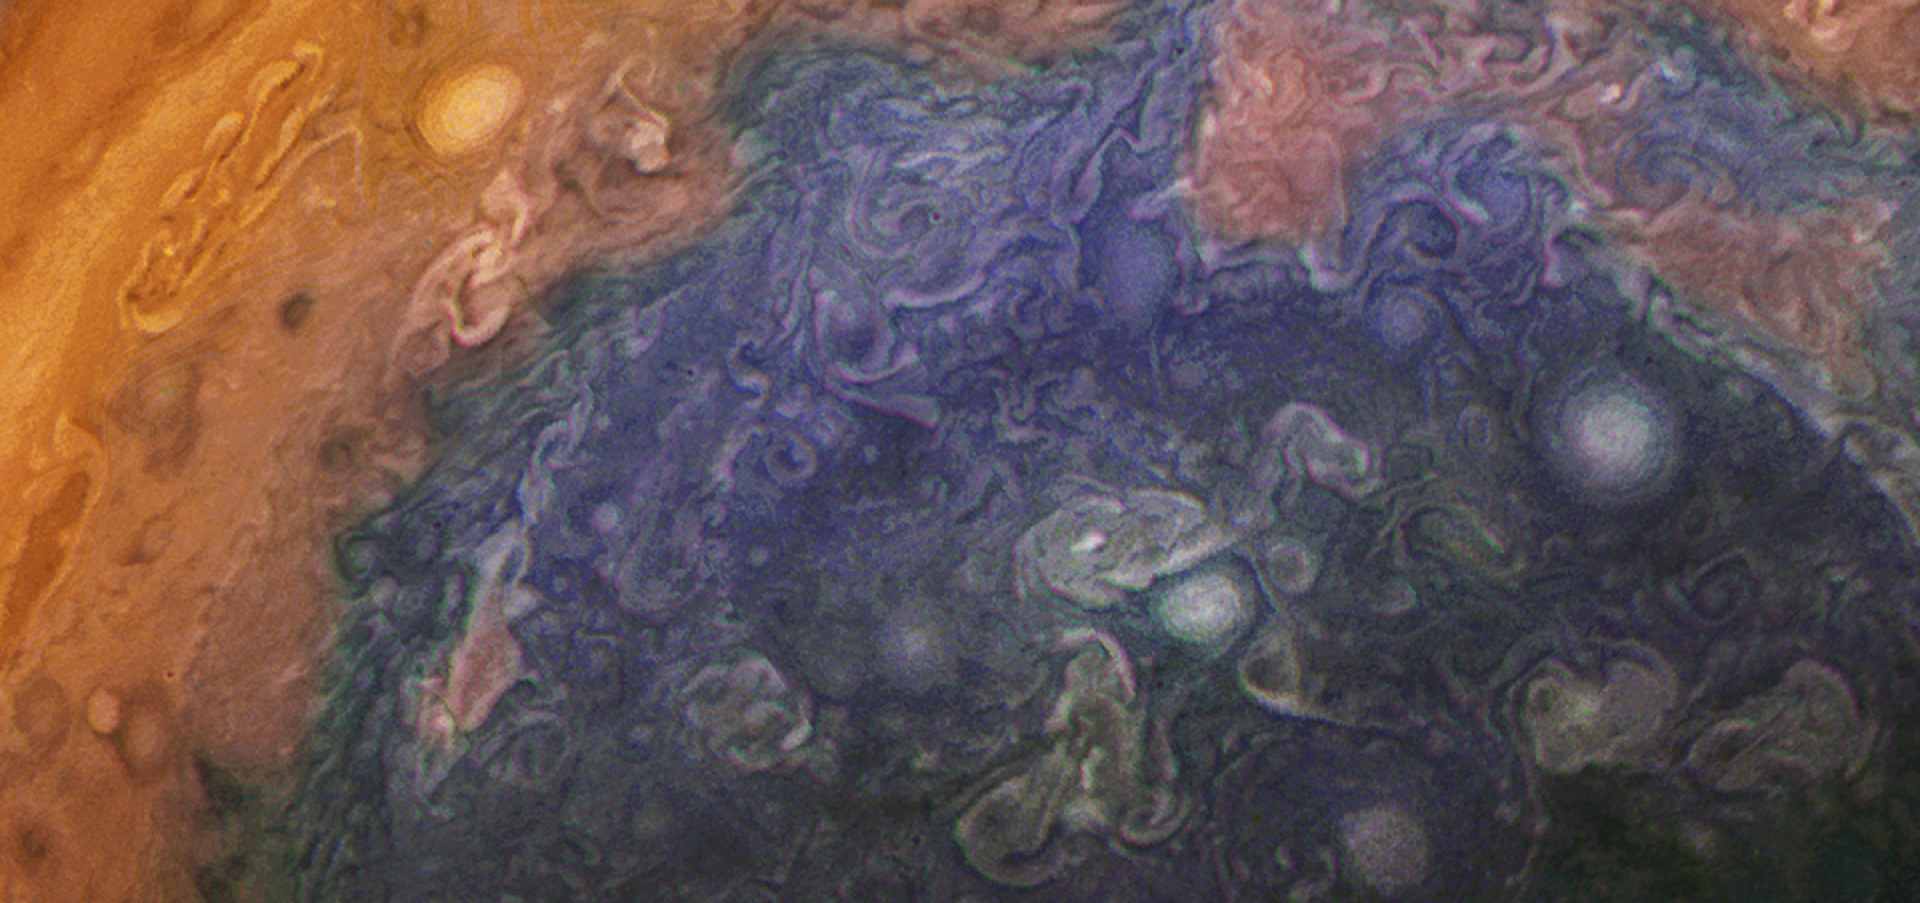 Let Glorious Jupiter Distract You From Existential Dread